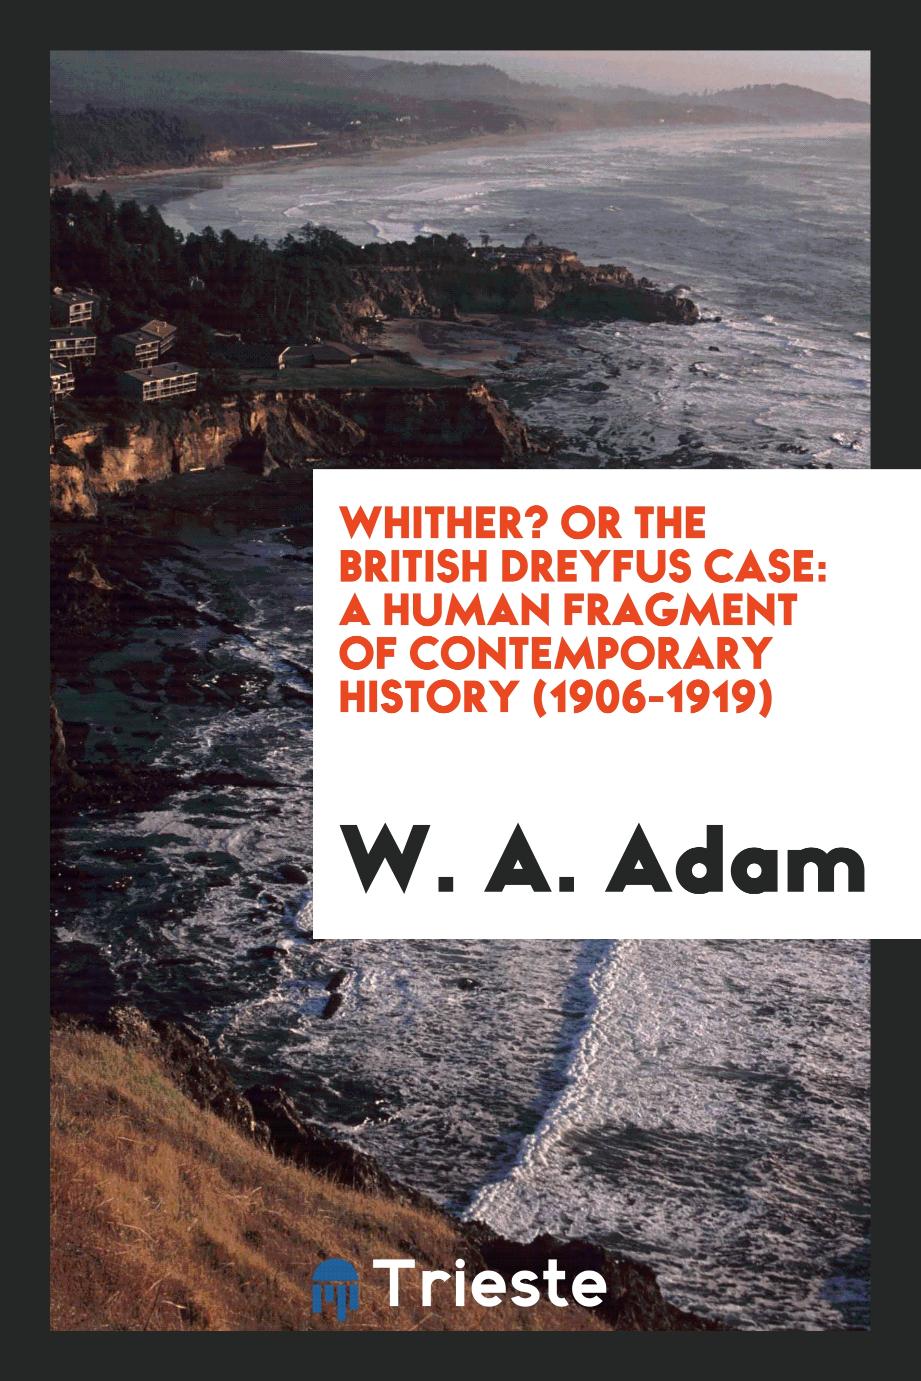 Whither? or The British Dreyfus case: a human fragment of contemporary history (1906-1919)